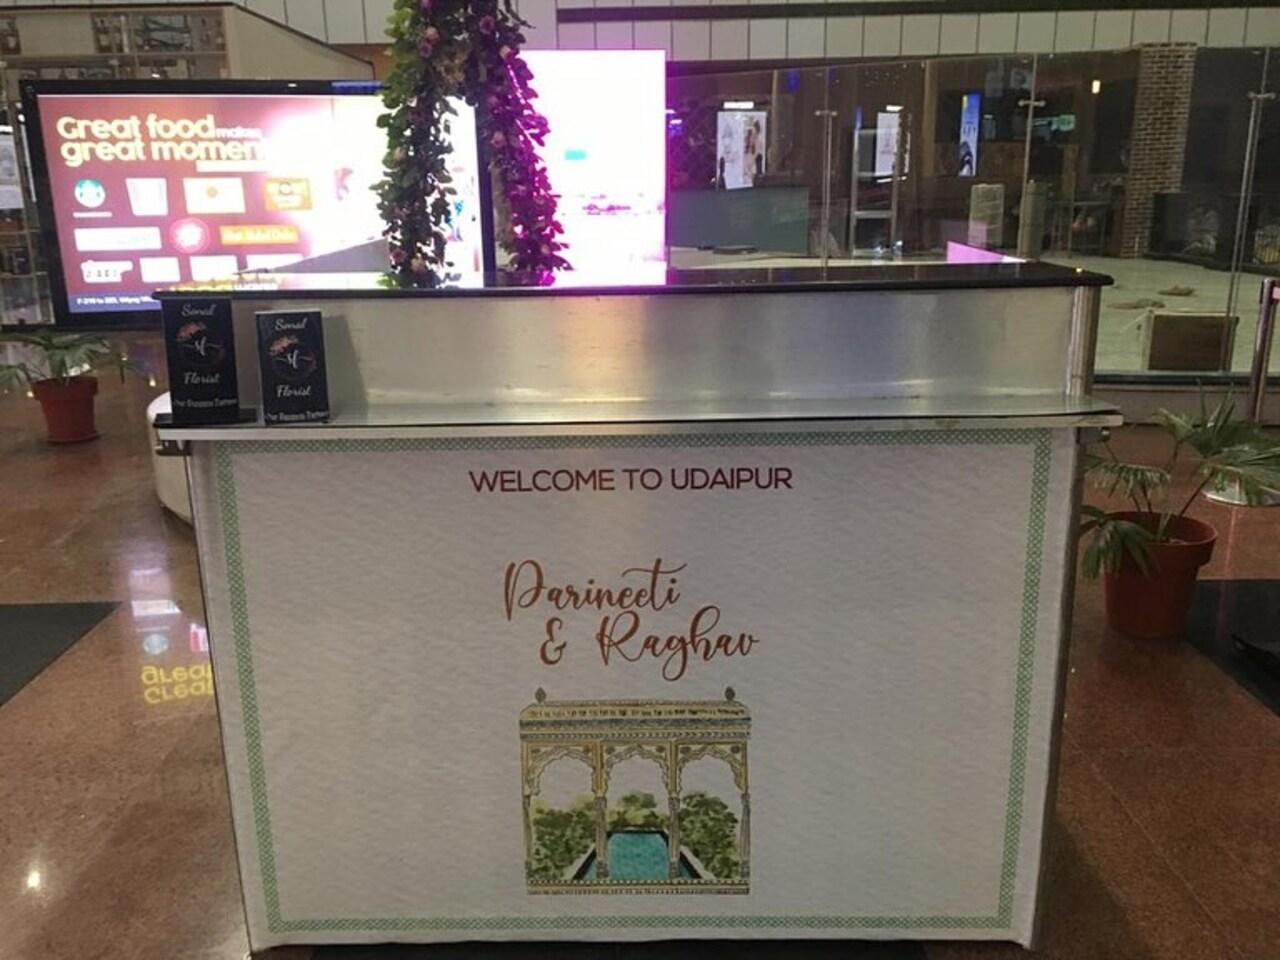 Another picture shows a counter welcoming Raghav and Parineeti to the city with graphics similar to the ones used in their wedding invites